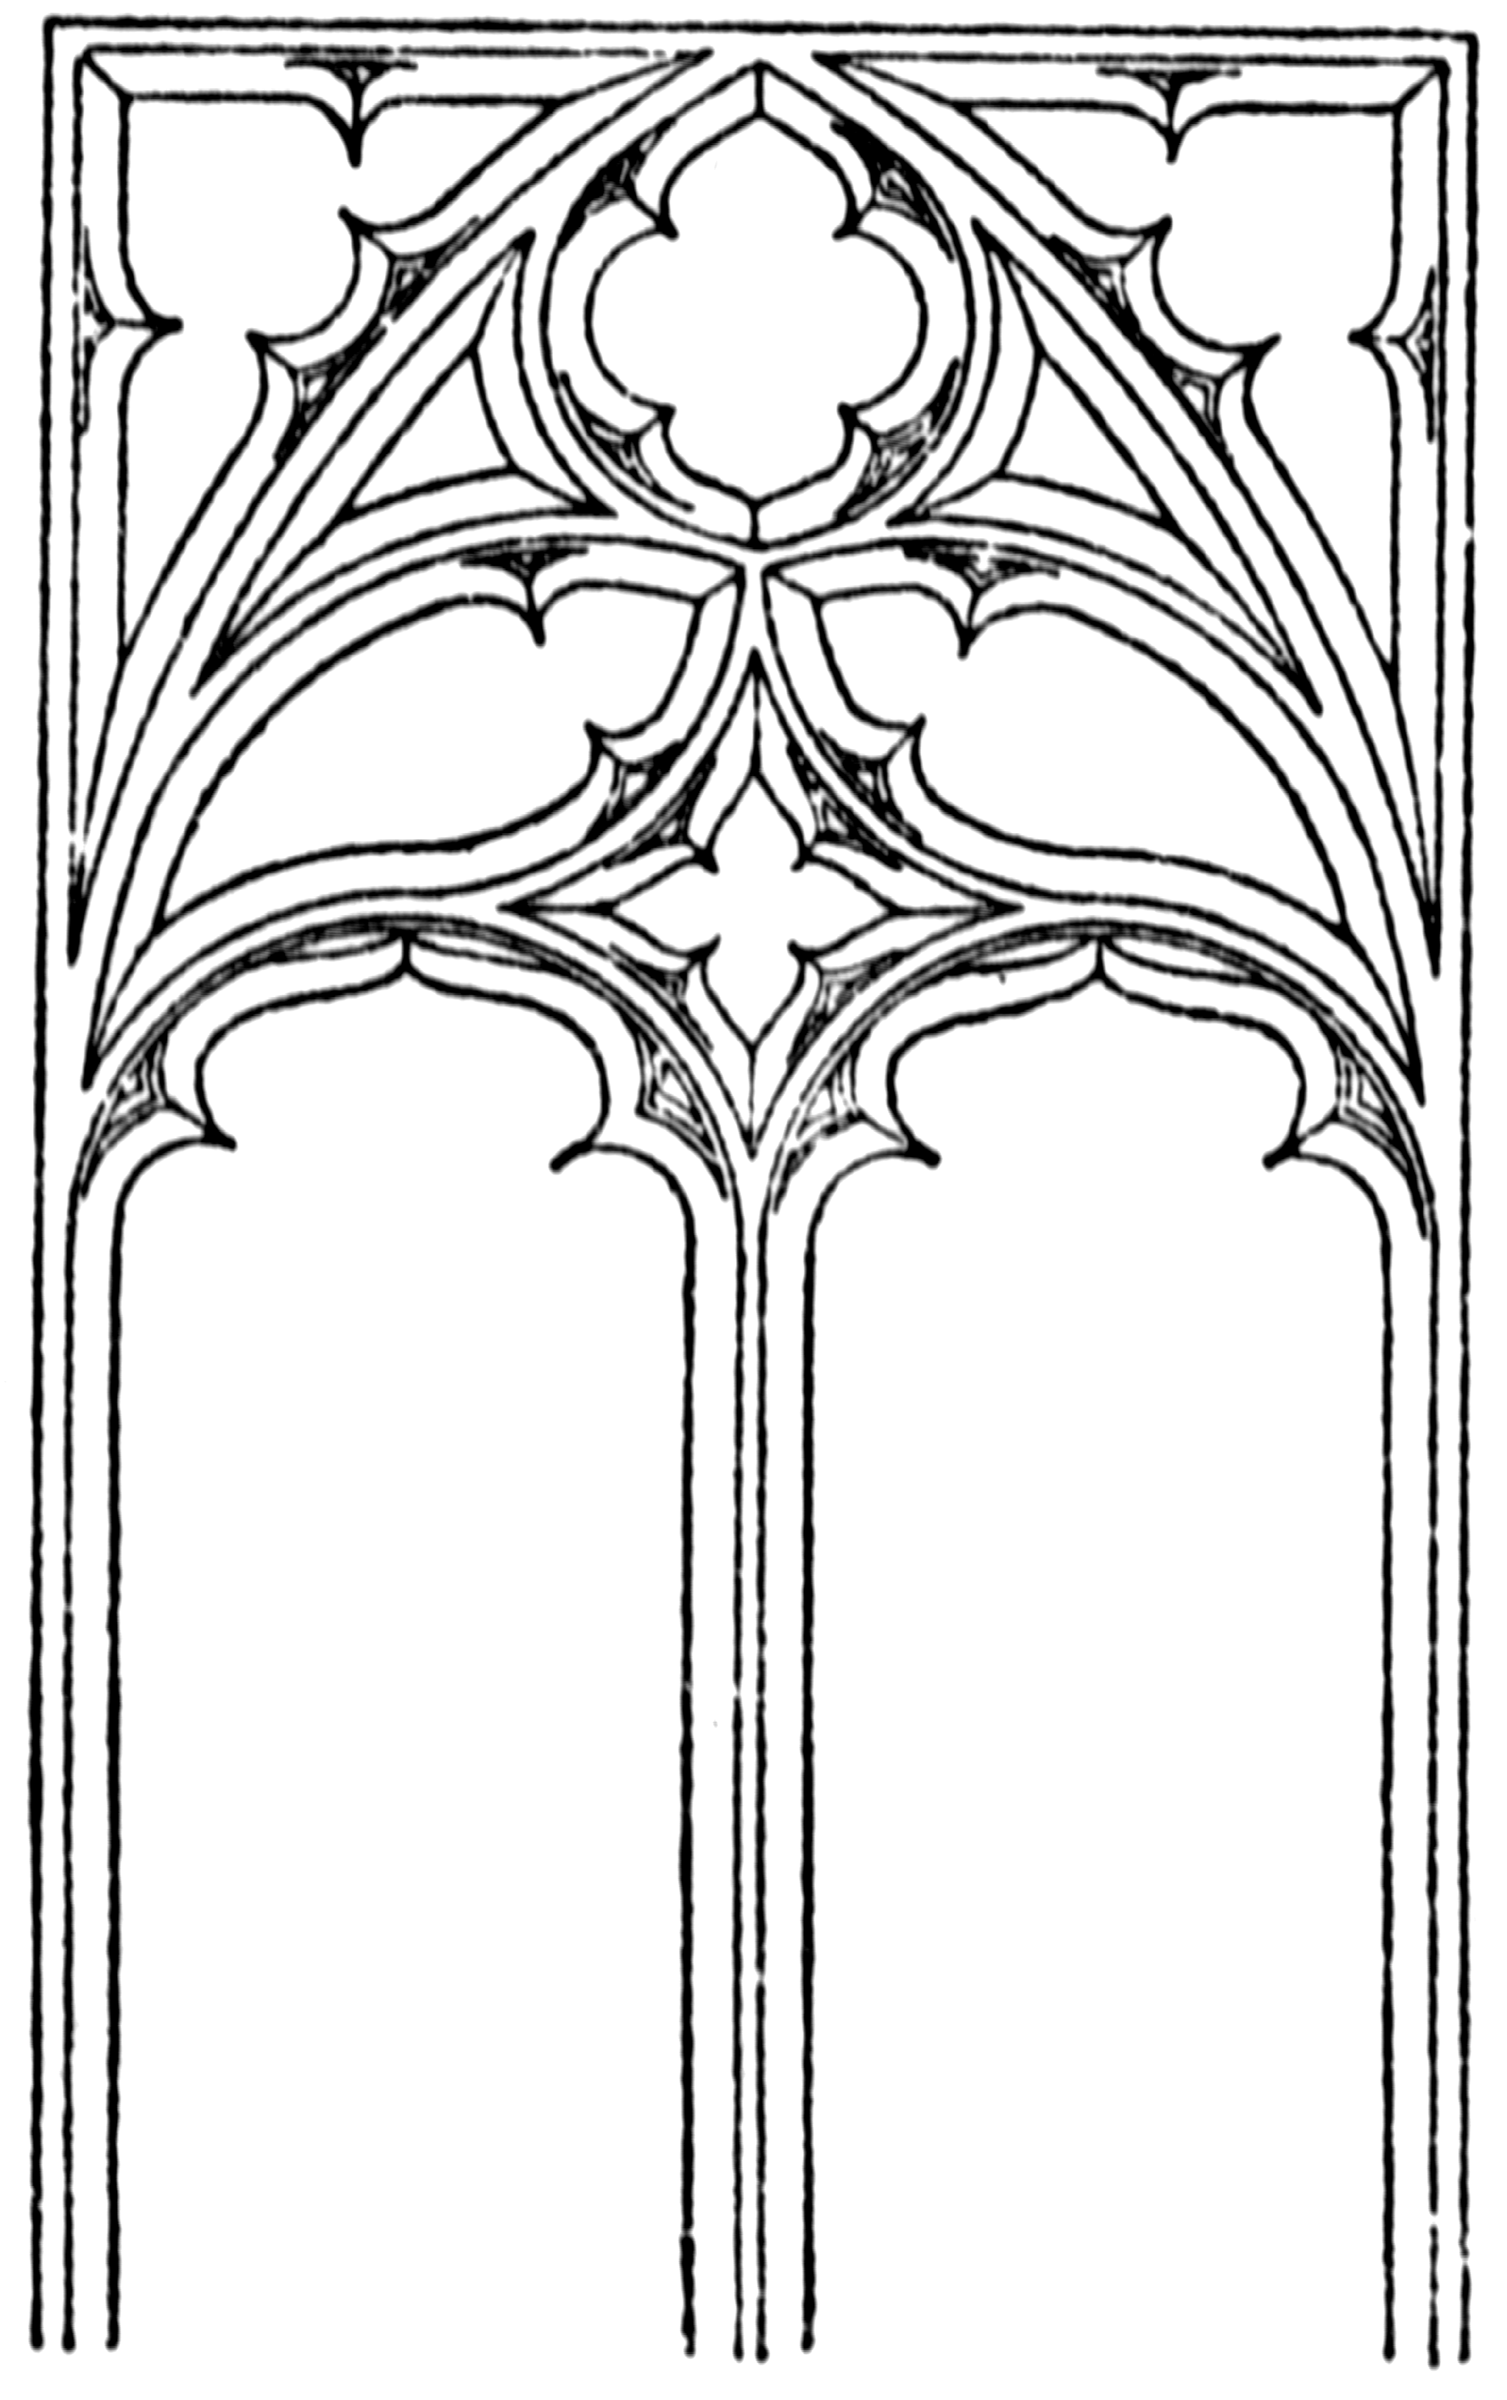 Gothic tracery | ClipArt ETC